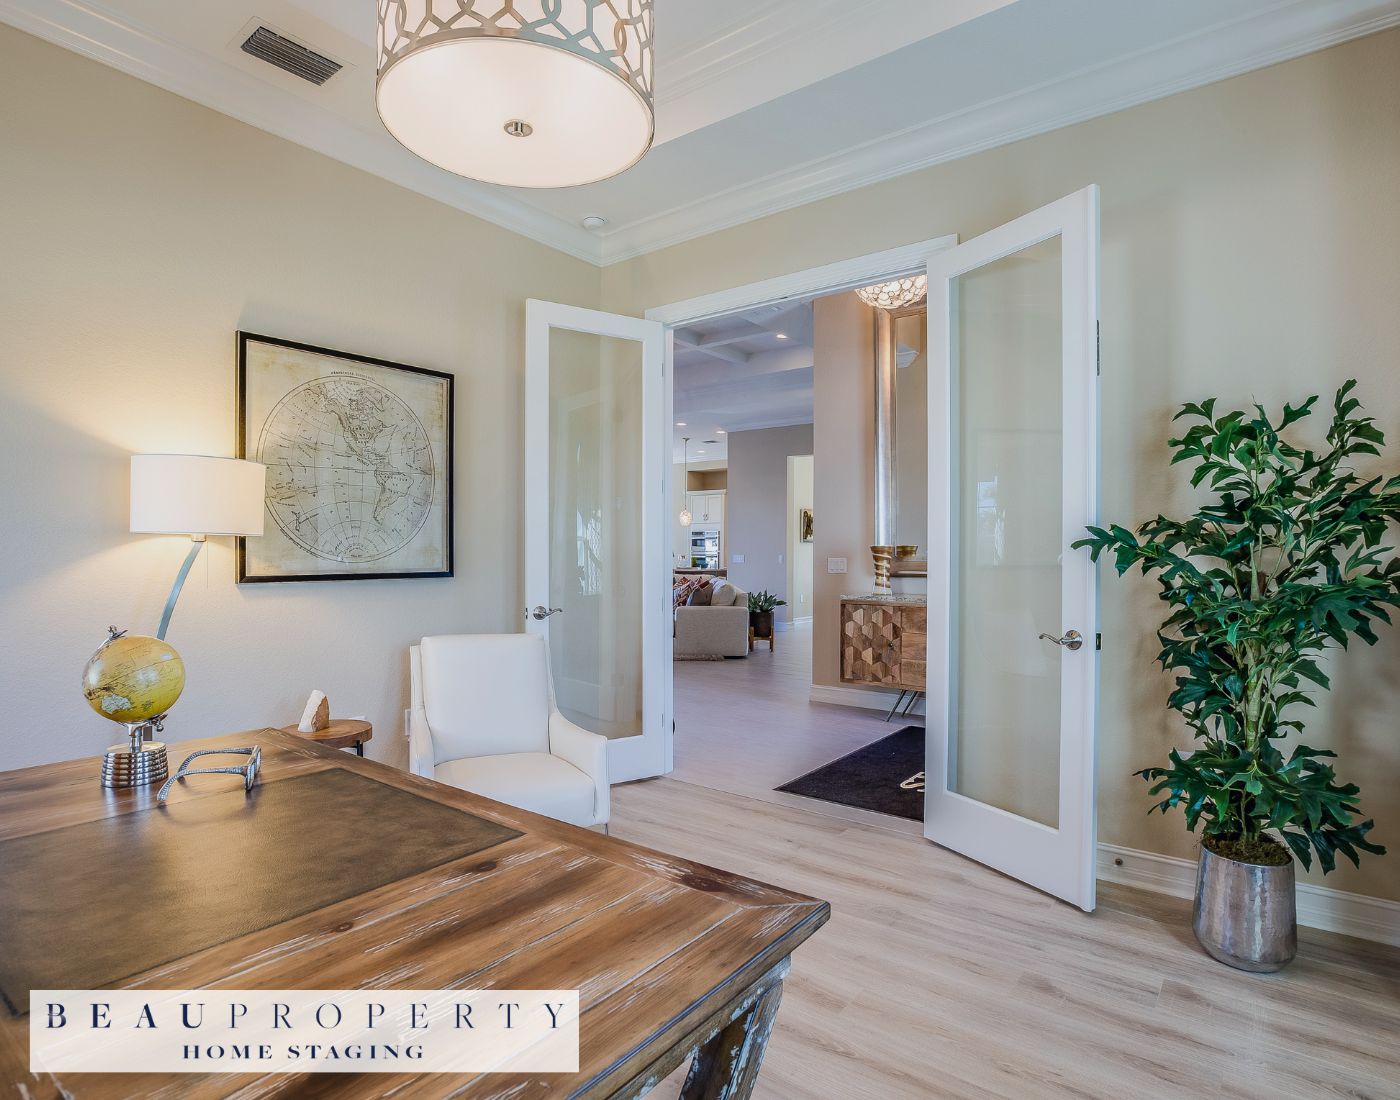 Maximise your home's appeal and accelerate your sale with our expert home staging tips. Learn how to declutter, enhance lighting, and utilize space effectively for a swift, profitable sale.